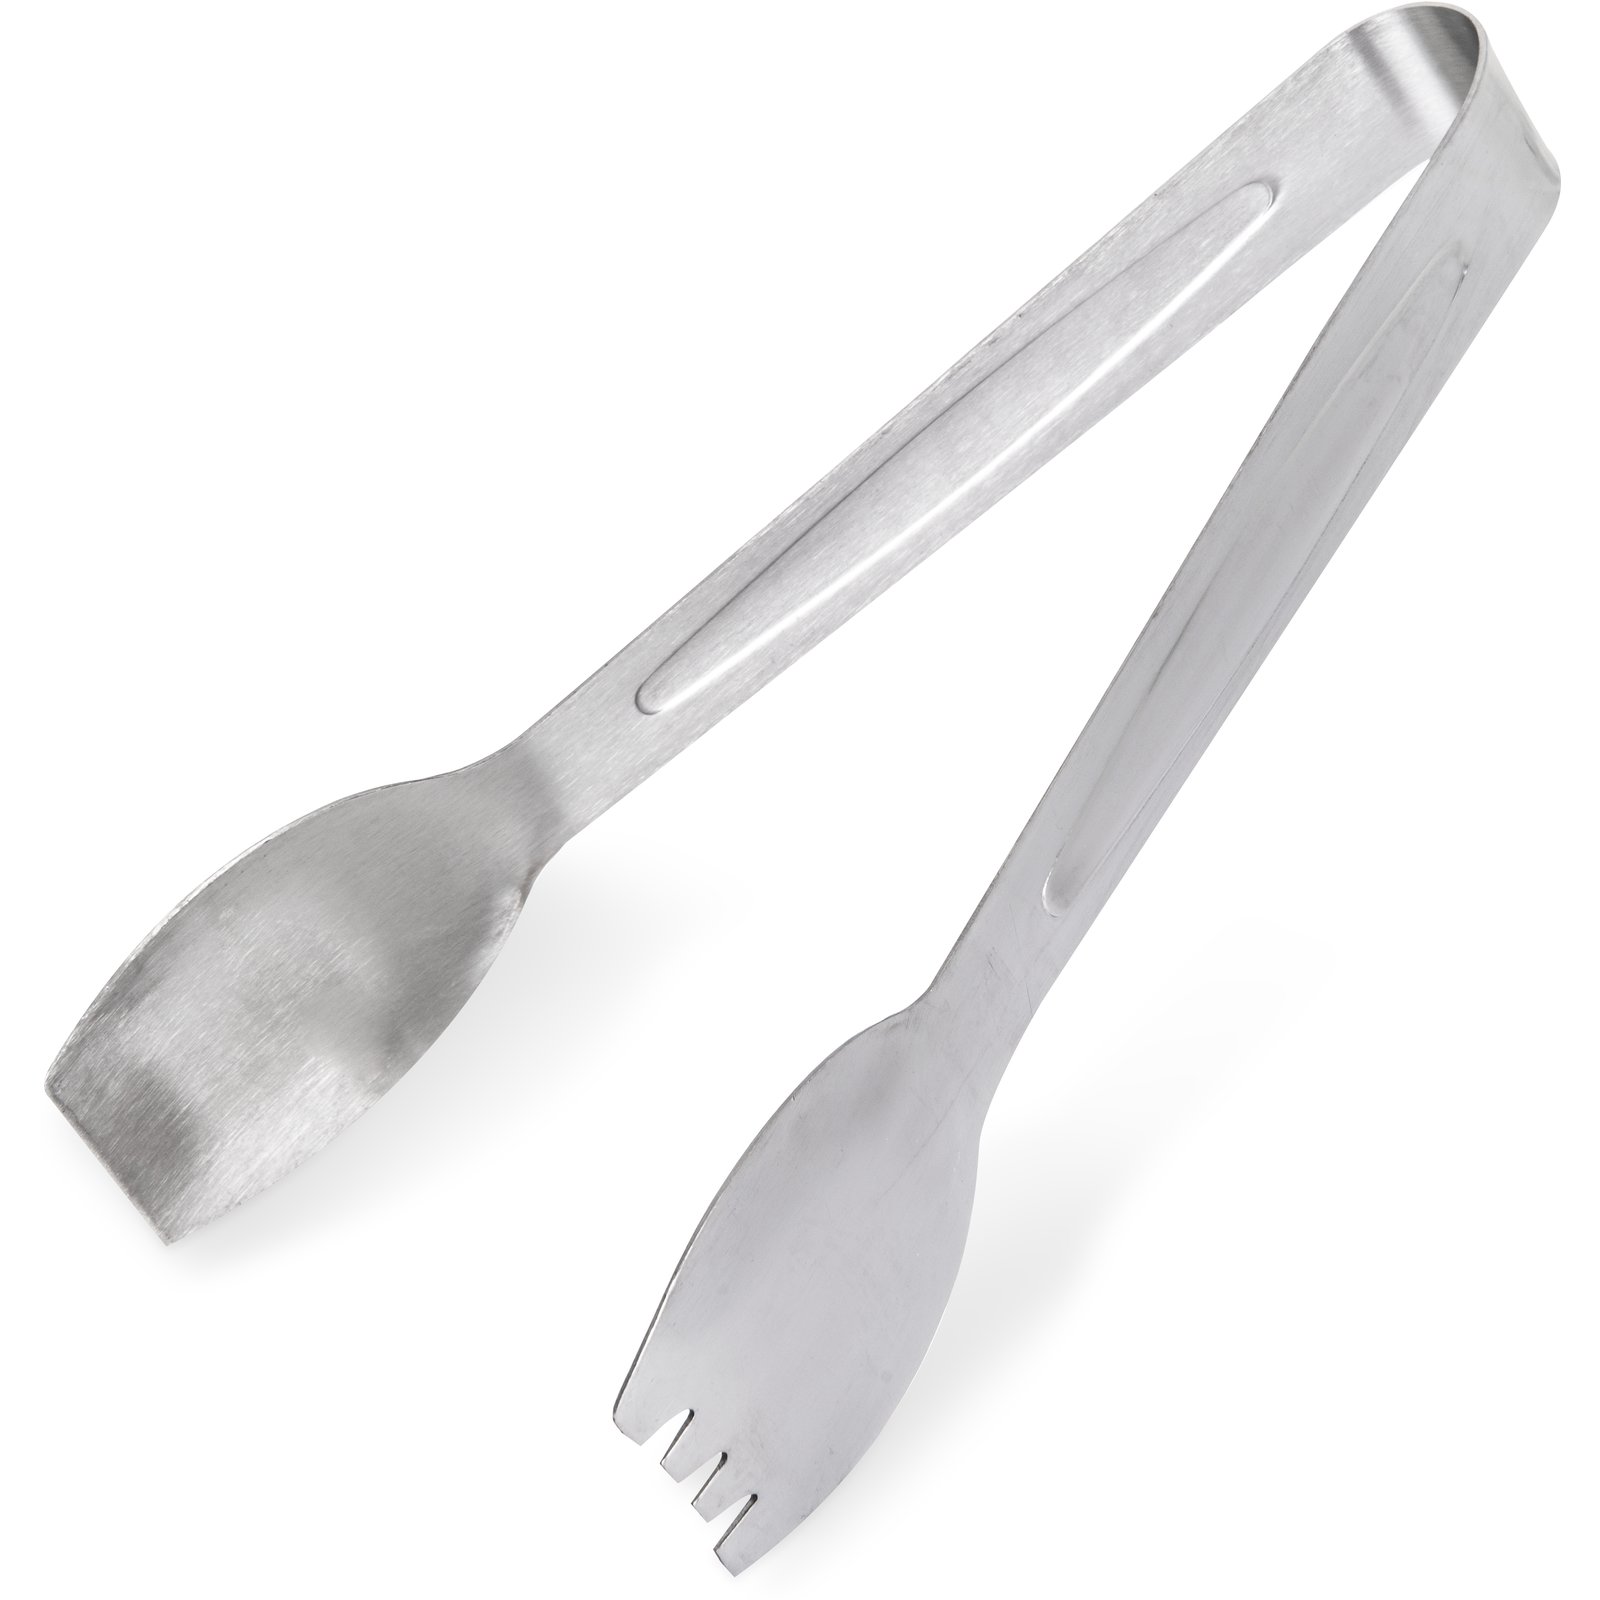 GET BSRIM-08 9 Stainless Steel Salad Tongs with Mirror Finish